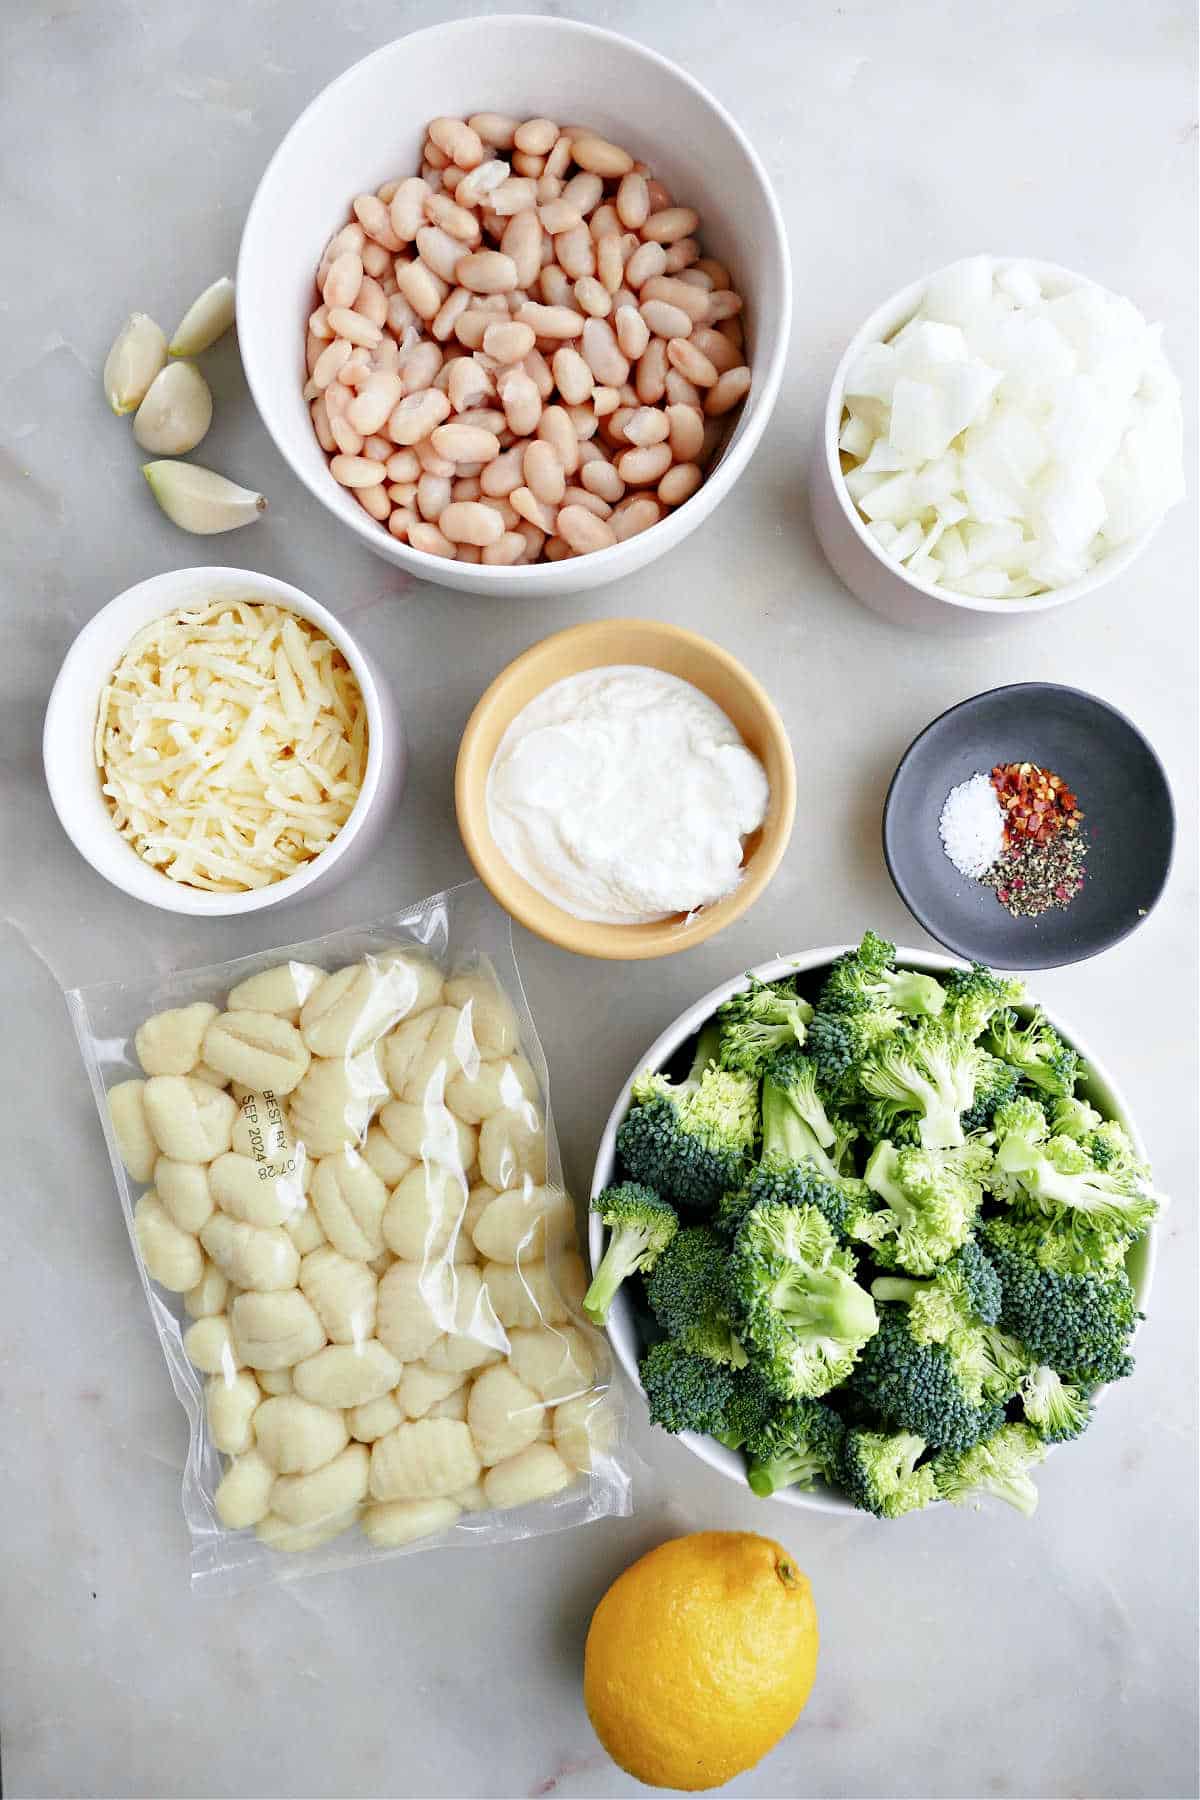 lemon, gnocchi, broccoli, cheeses, garlic, white beans, diced onion, and spices on a counter